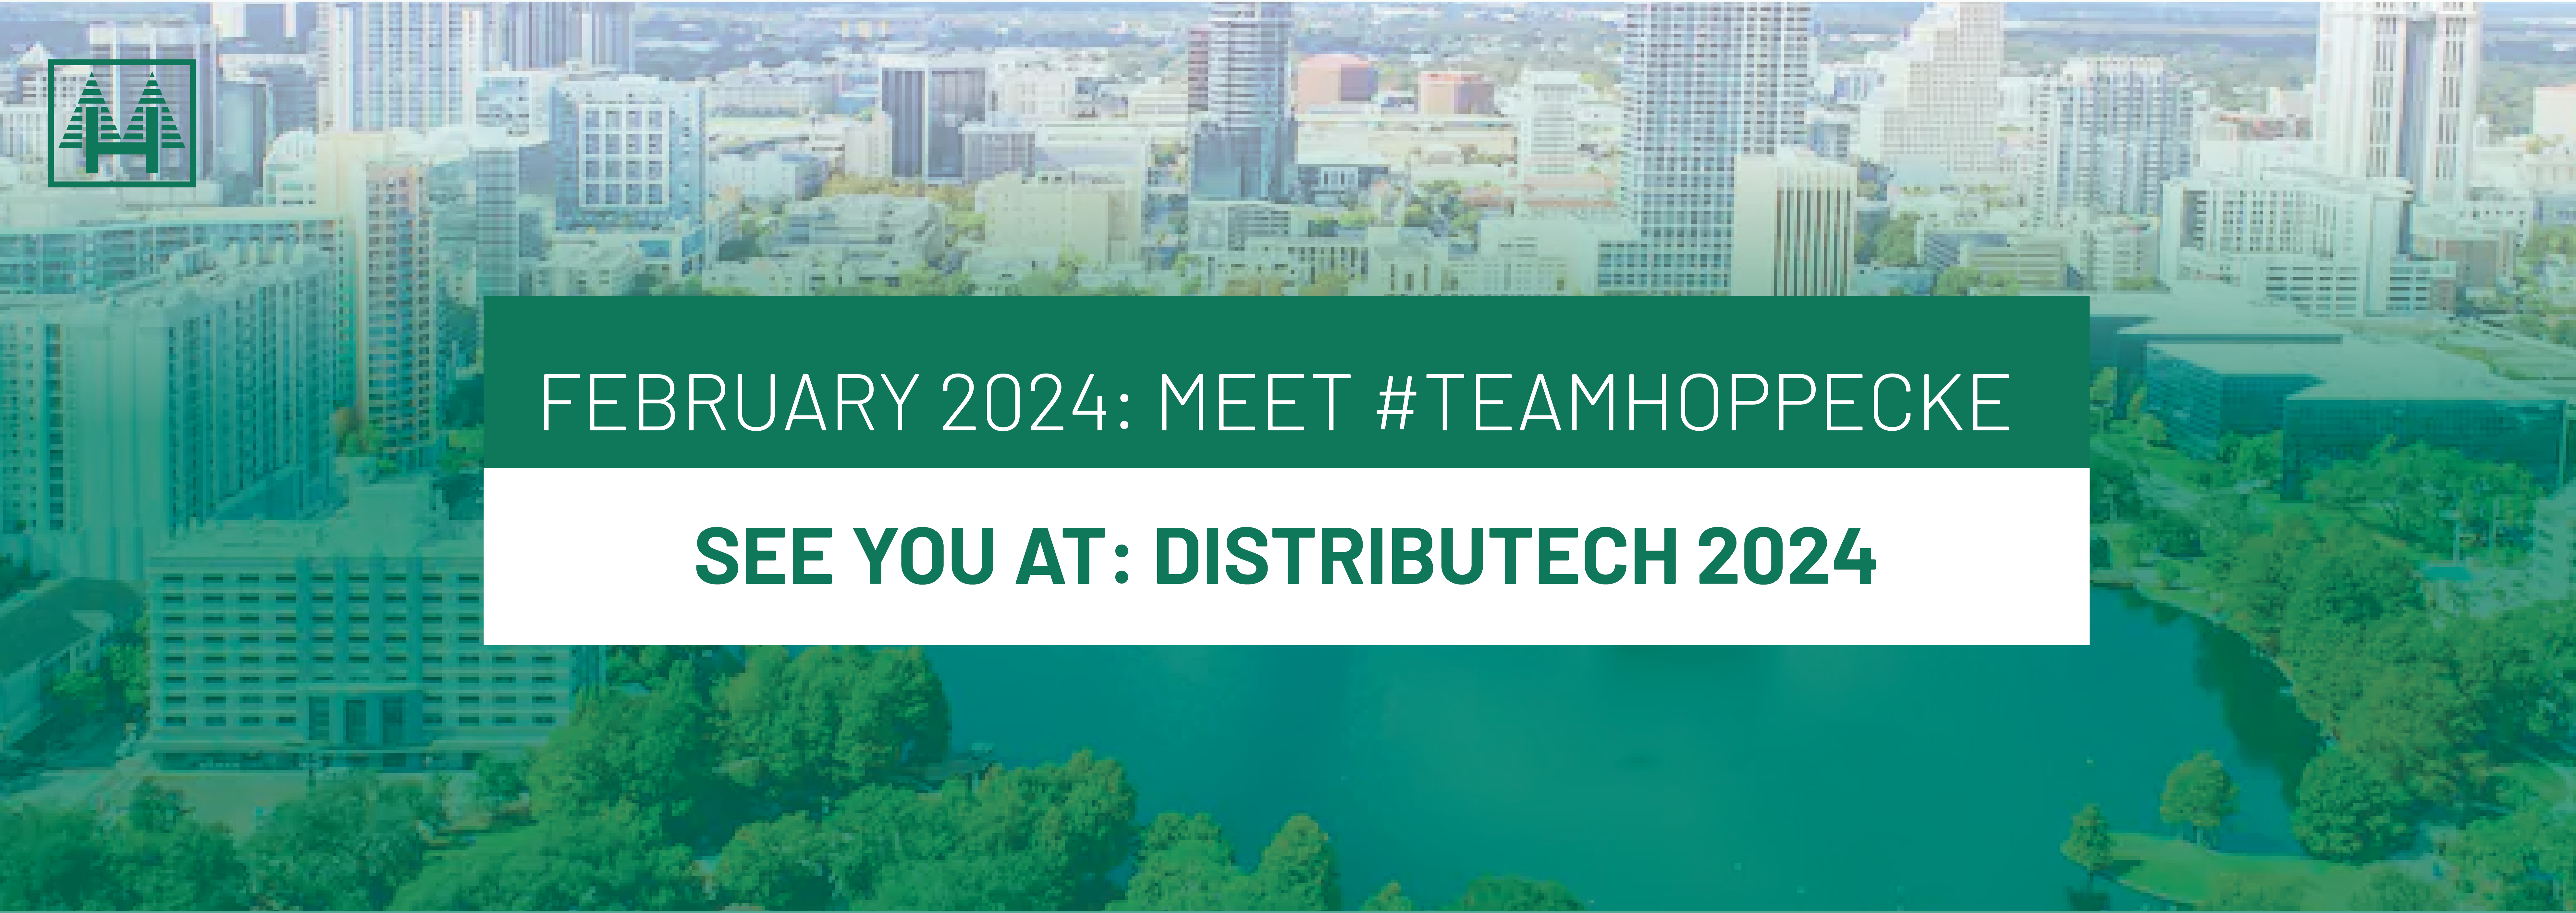 Get ready for Distributech 2024! - Monday, 29.01.2024